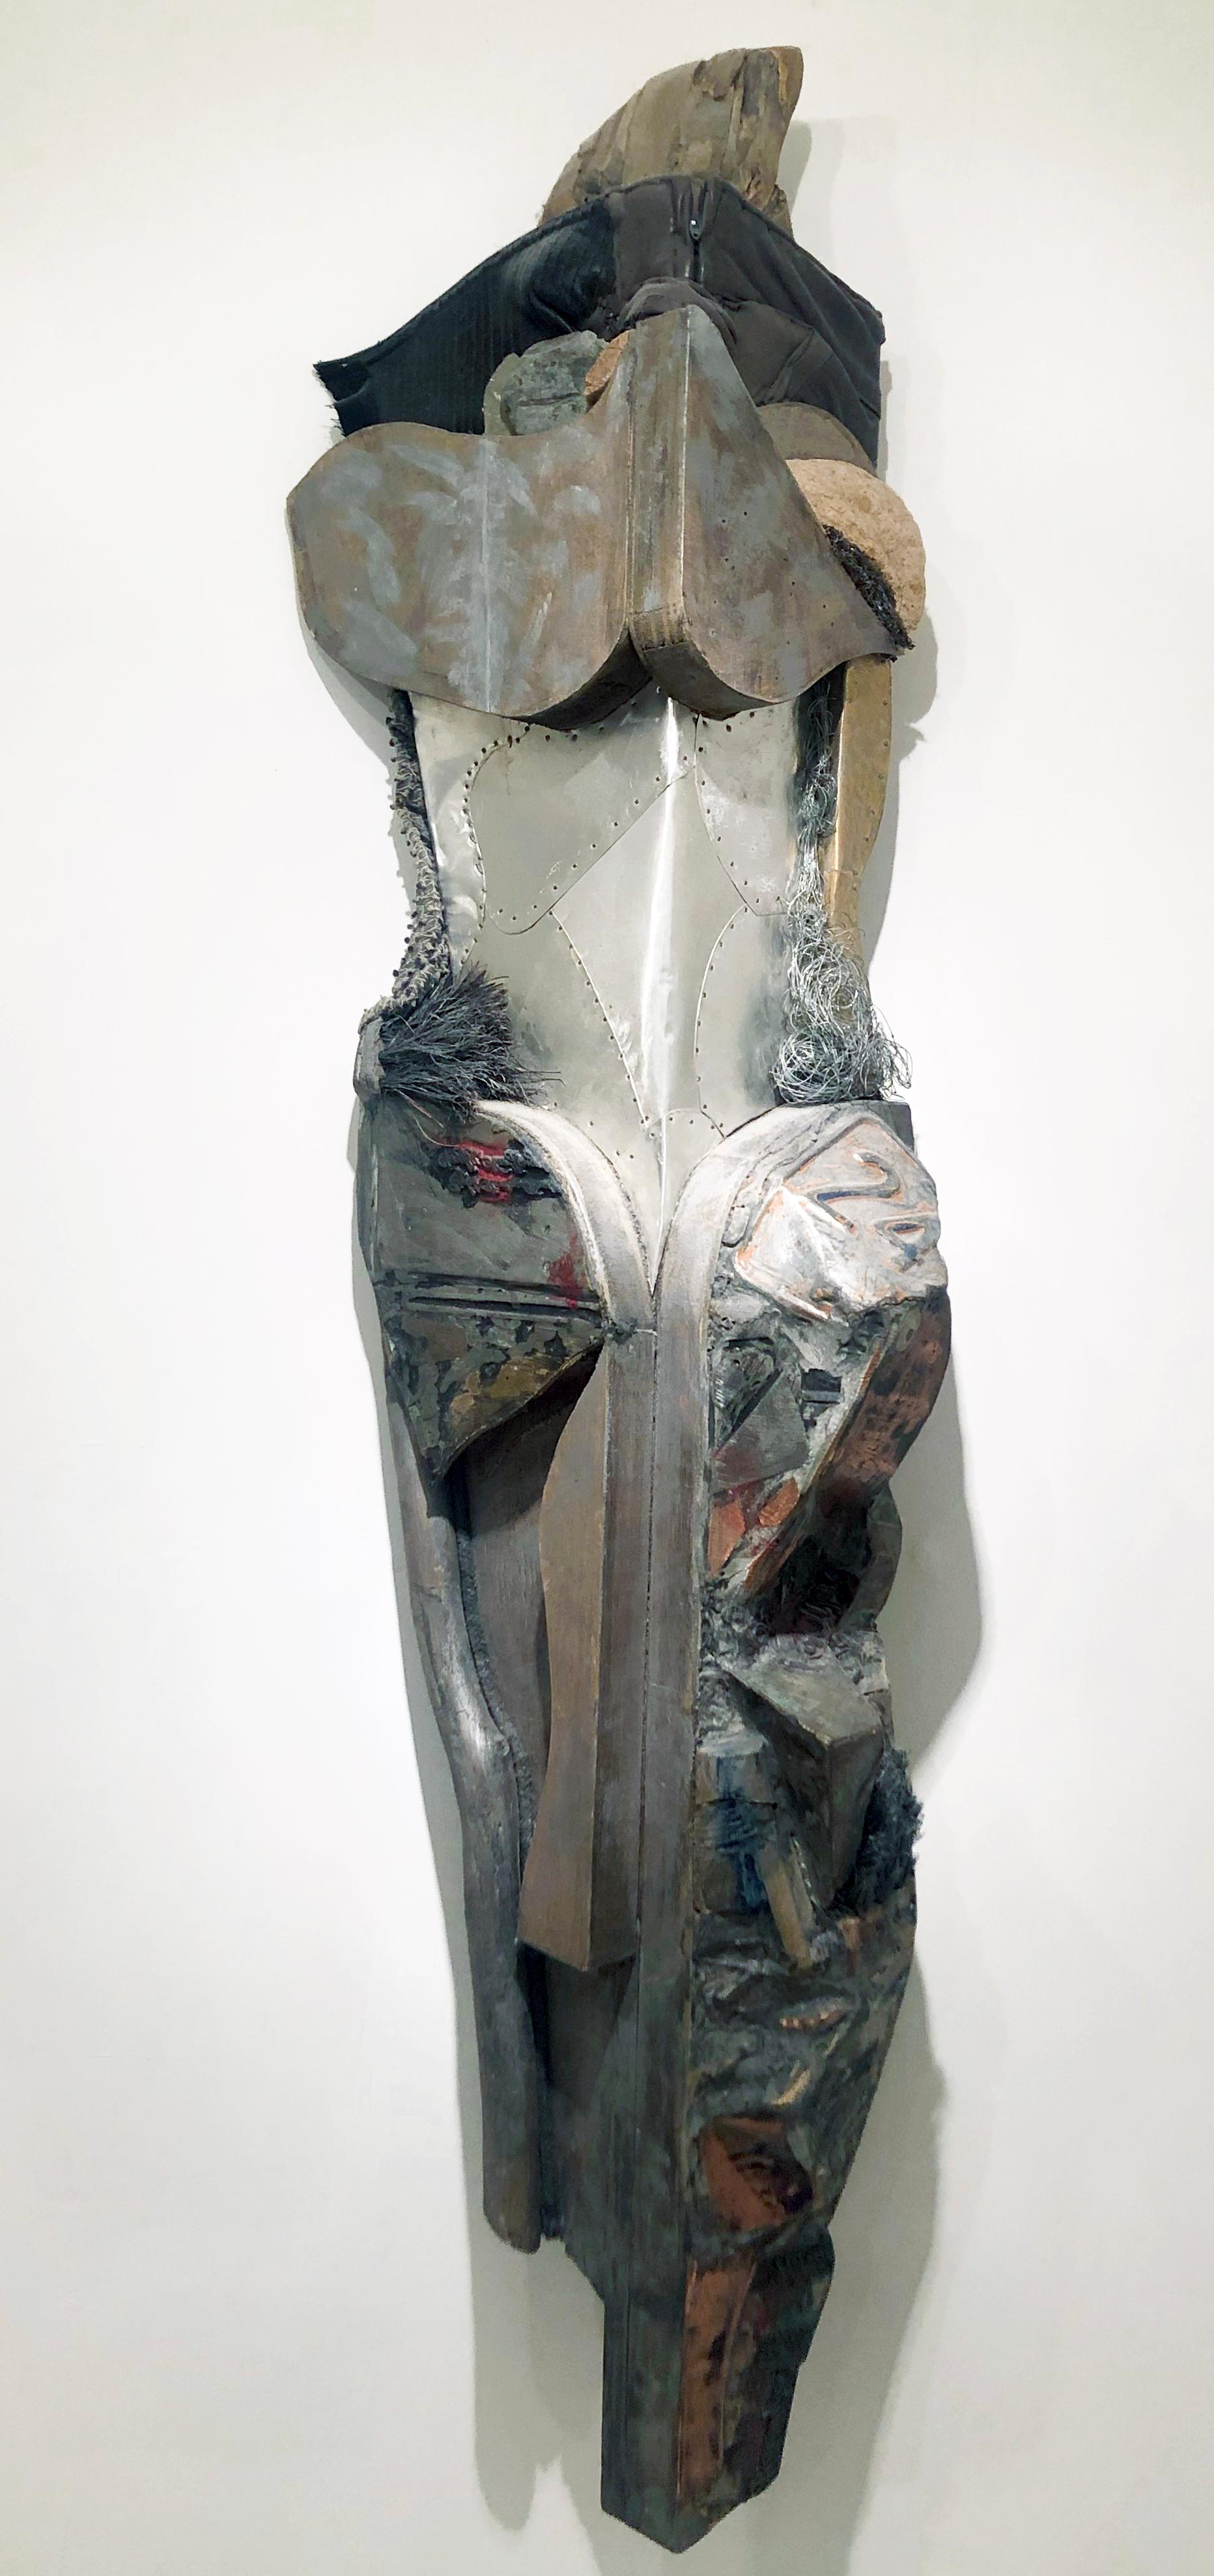 American Contemporary Mixed Media Sculpture by Linda Stein - Quiet Strength 472